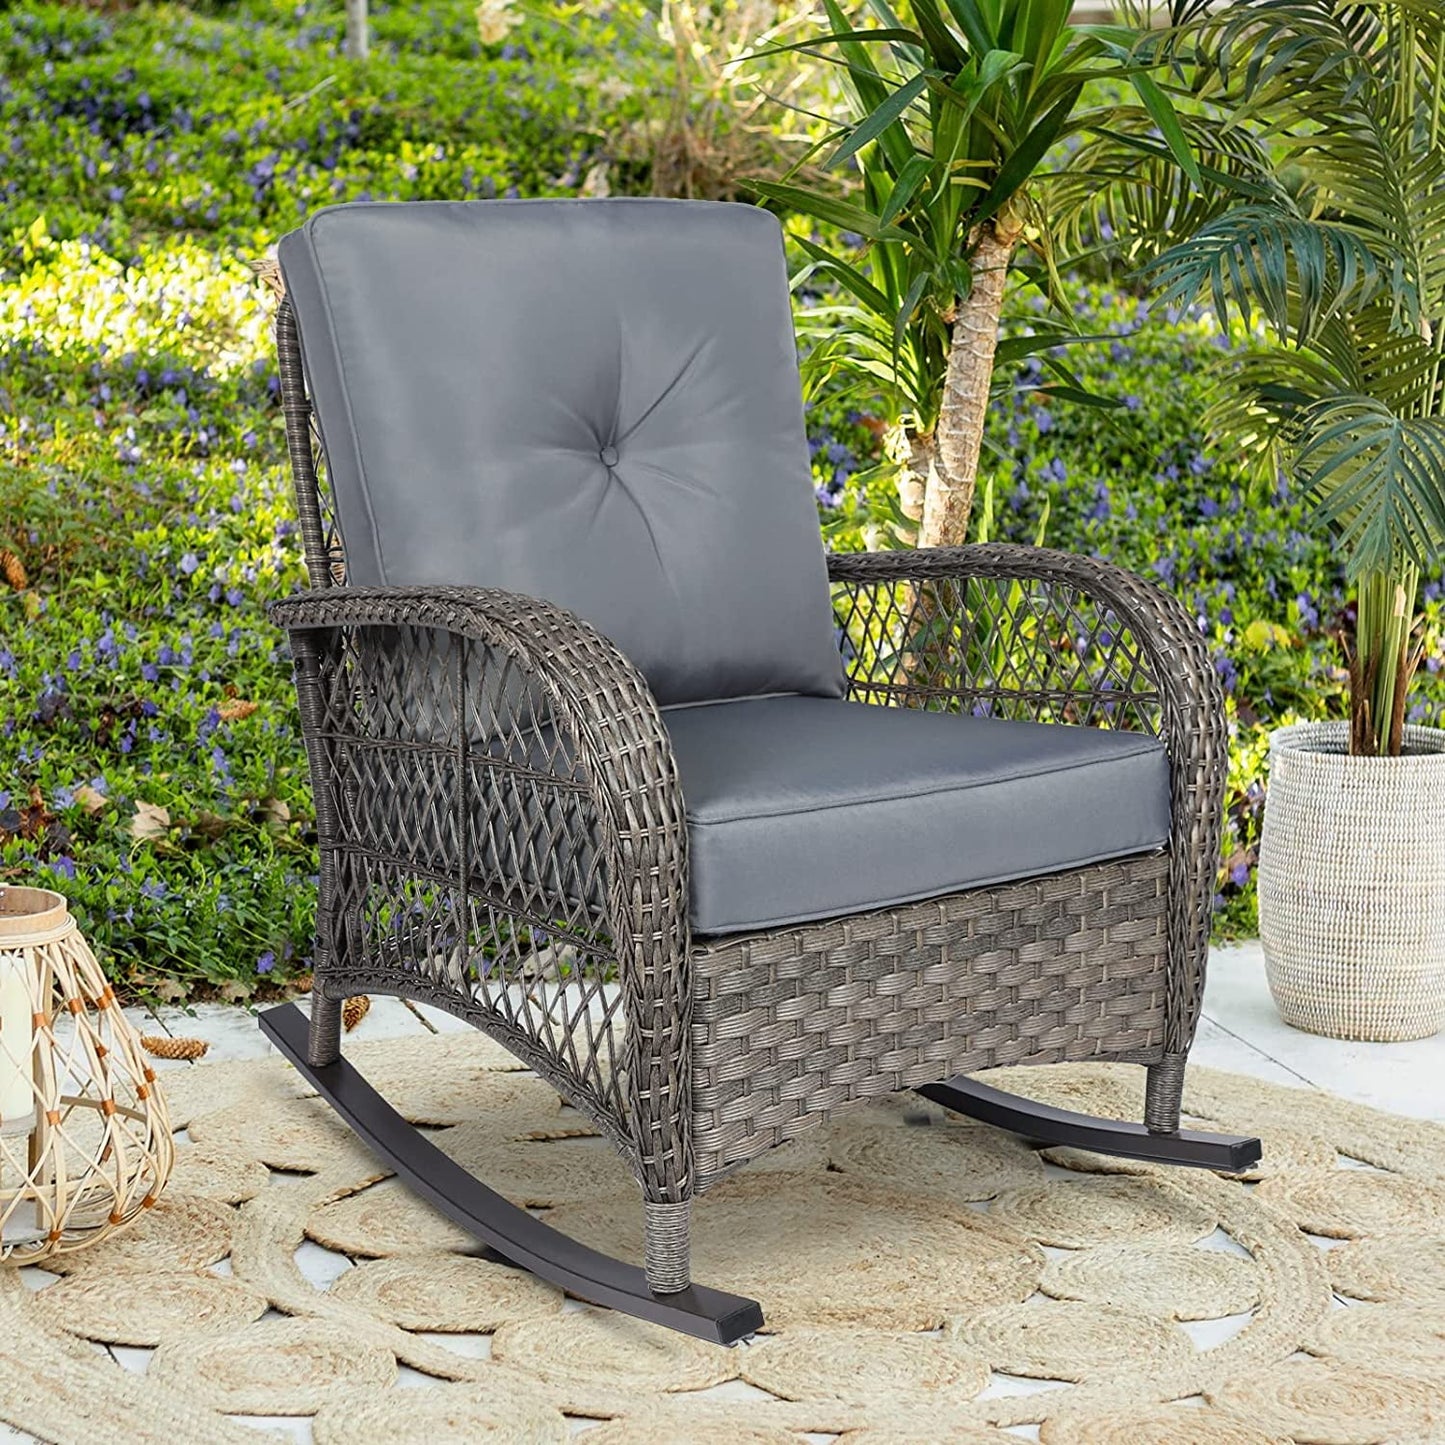 Outdoor Wicker Rocking Chair with Thickened Cushions, All-Weather Rattan Patio Rocking Chairs, Rocker Wicker Chair for Porch Garden & Backyard, Beige